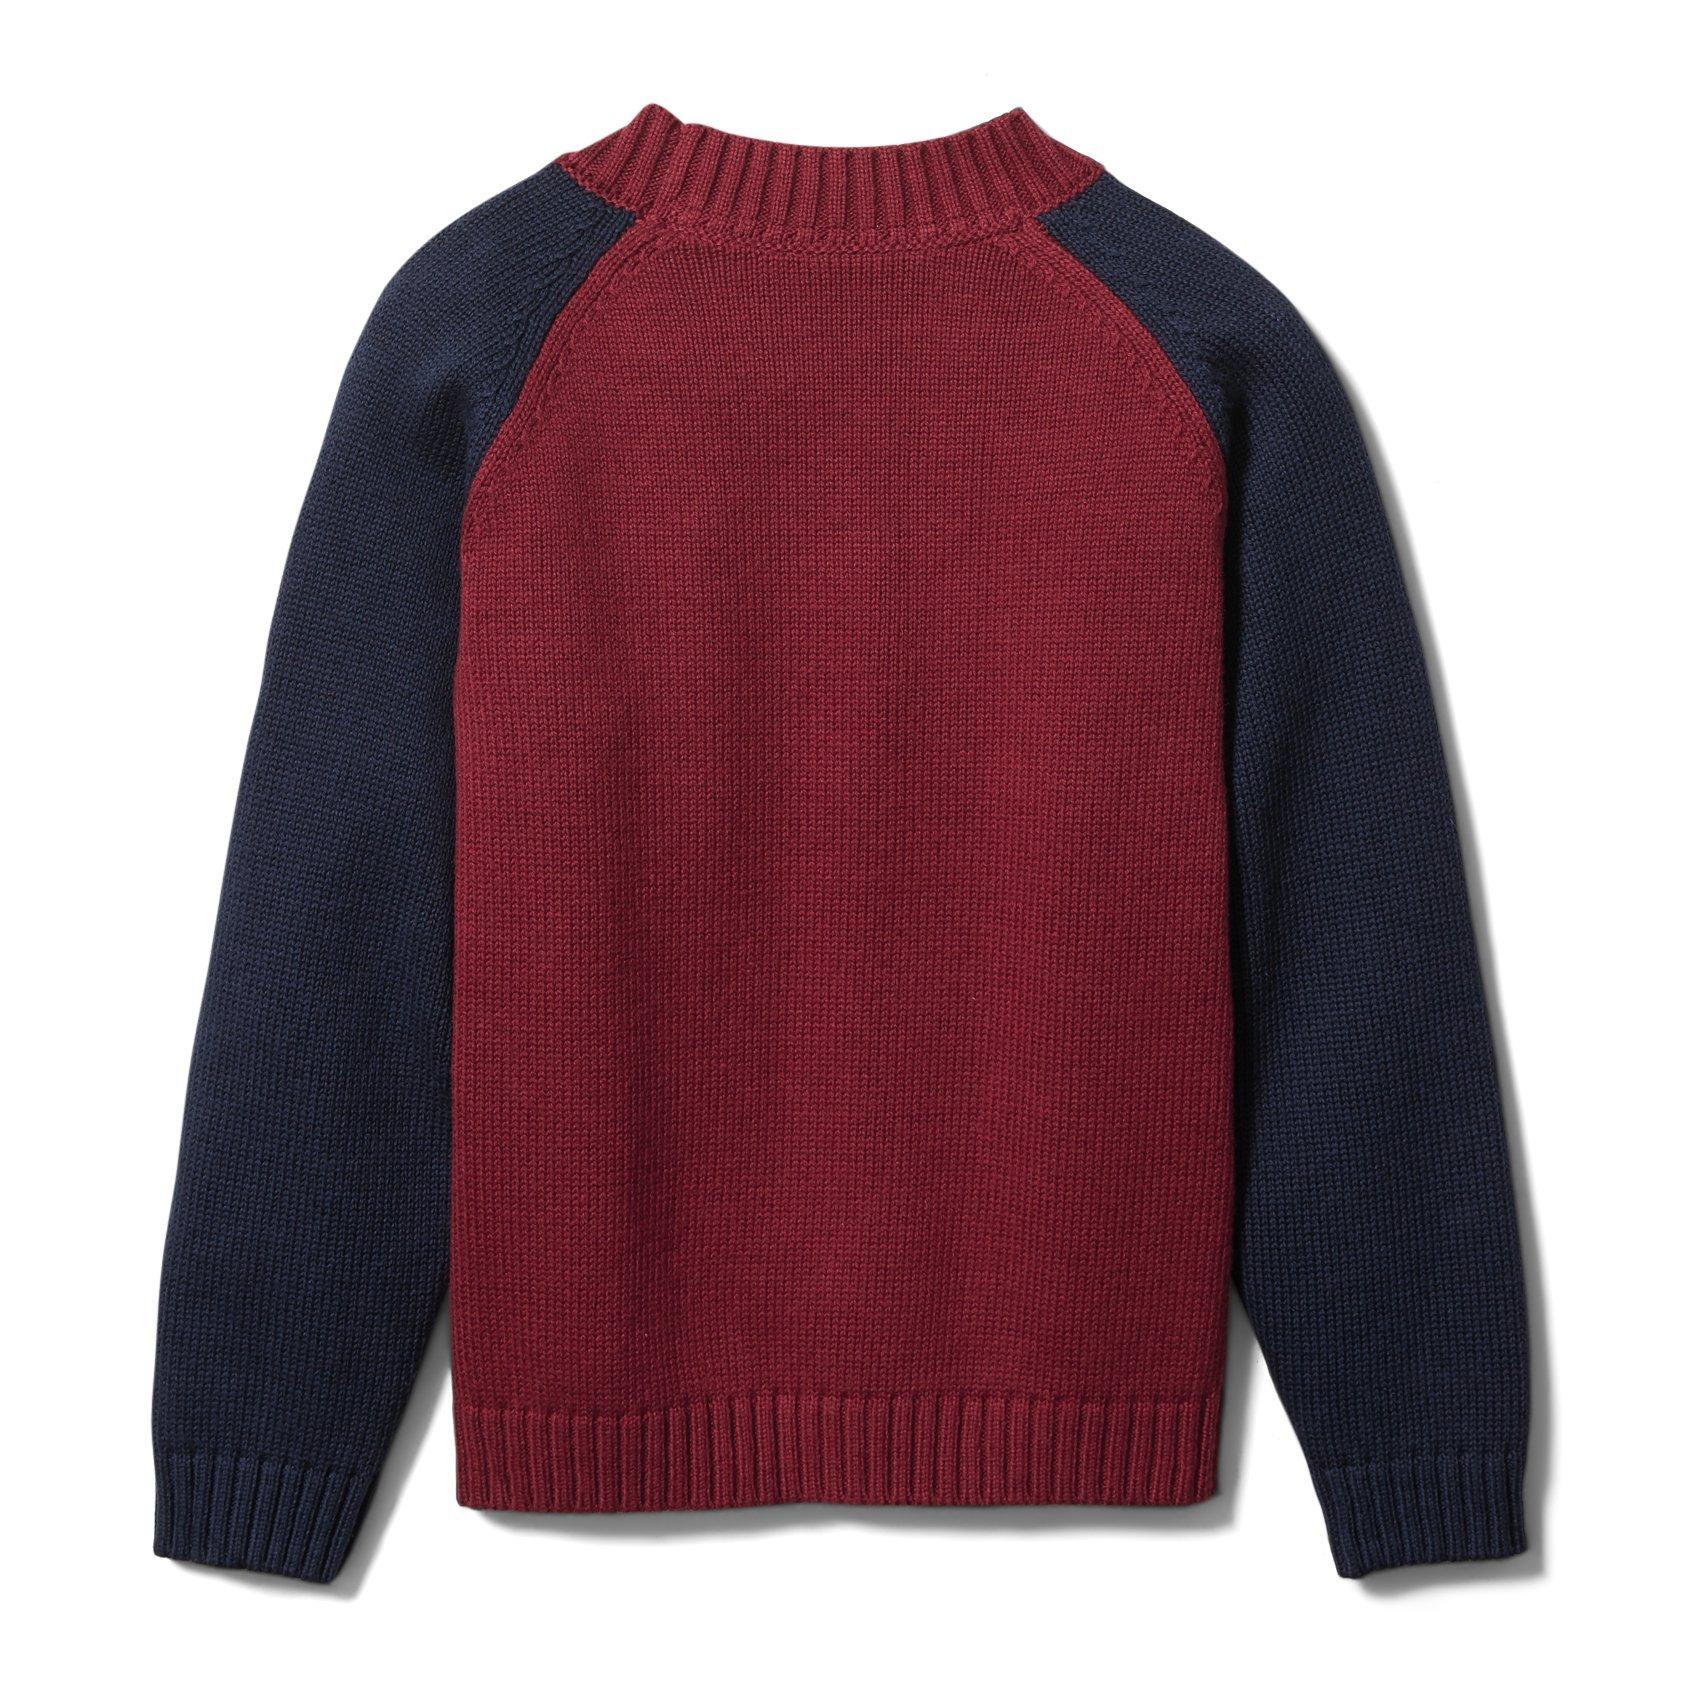 Boy Maroon Moose Sweater by Janie and Jack